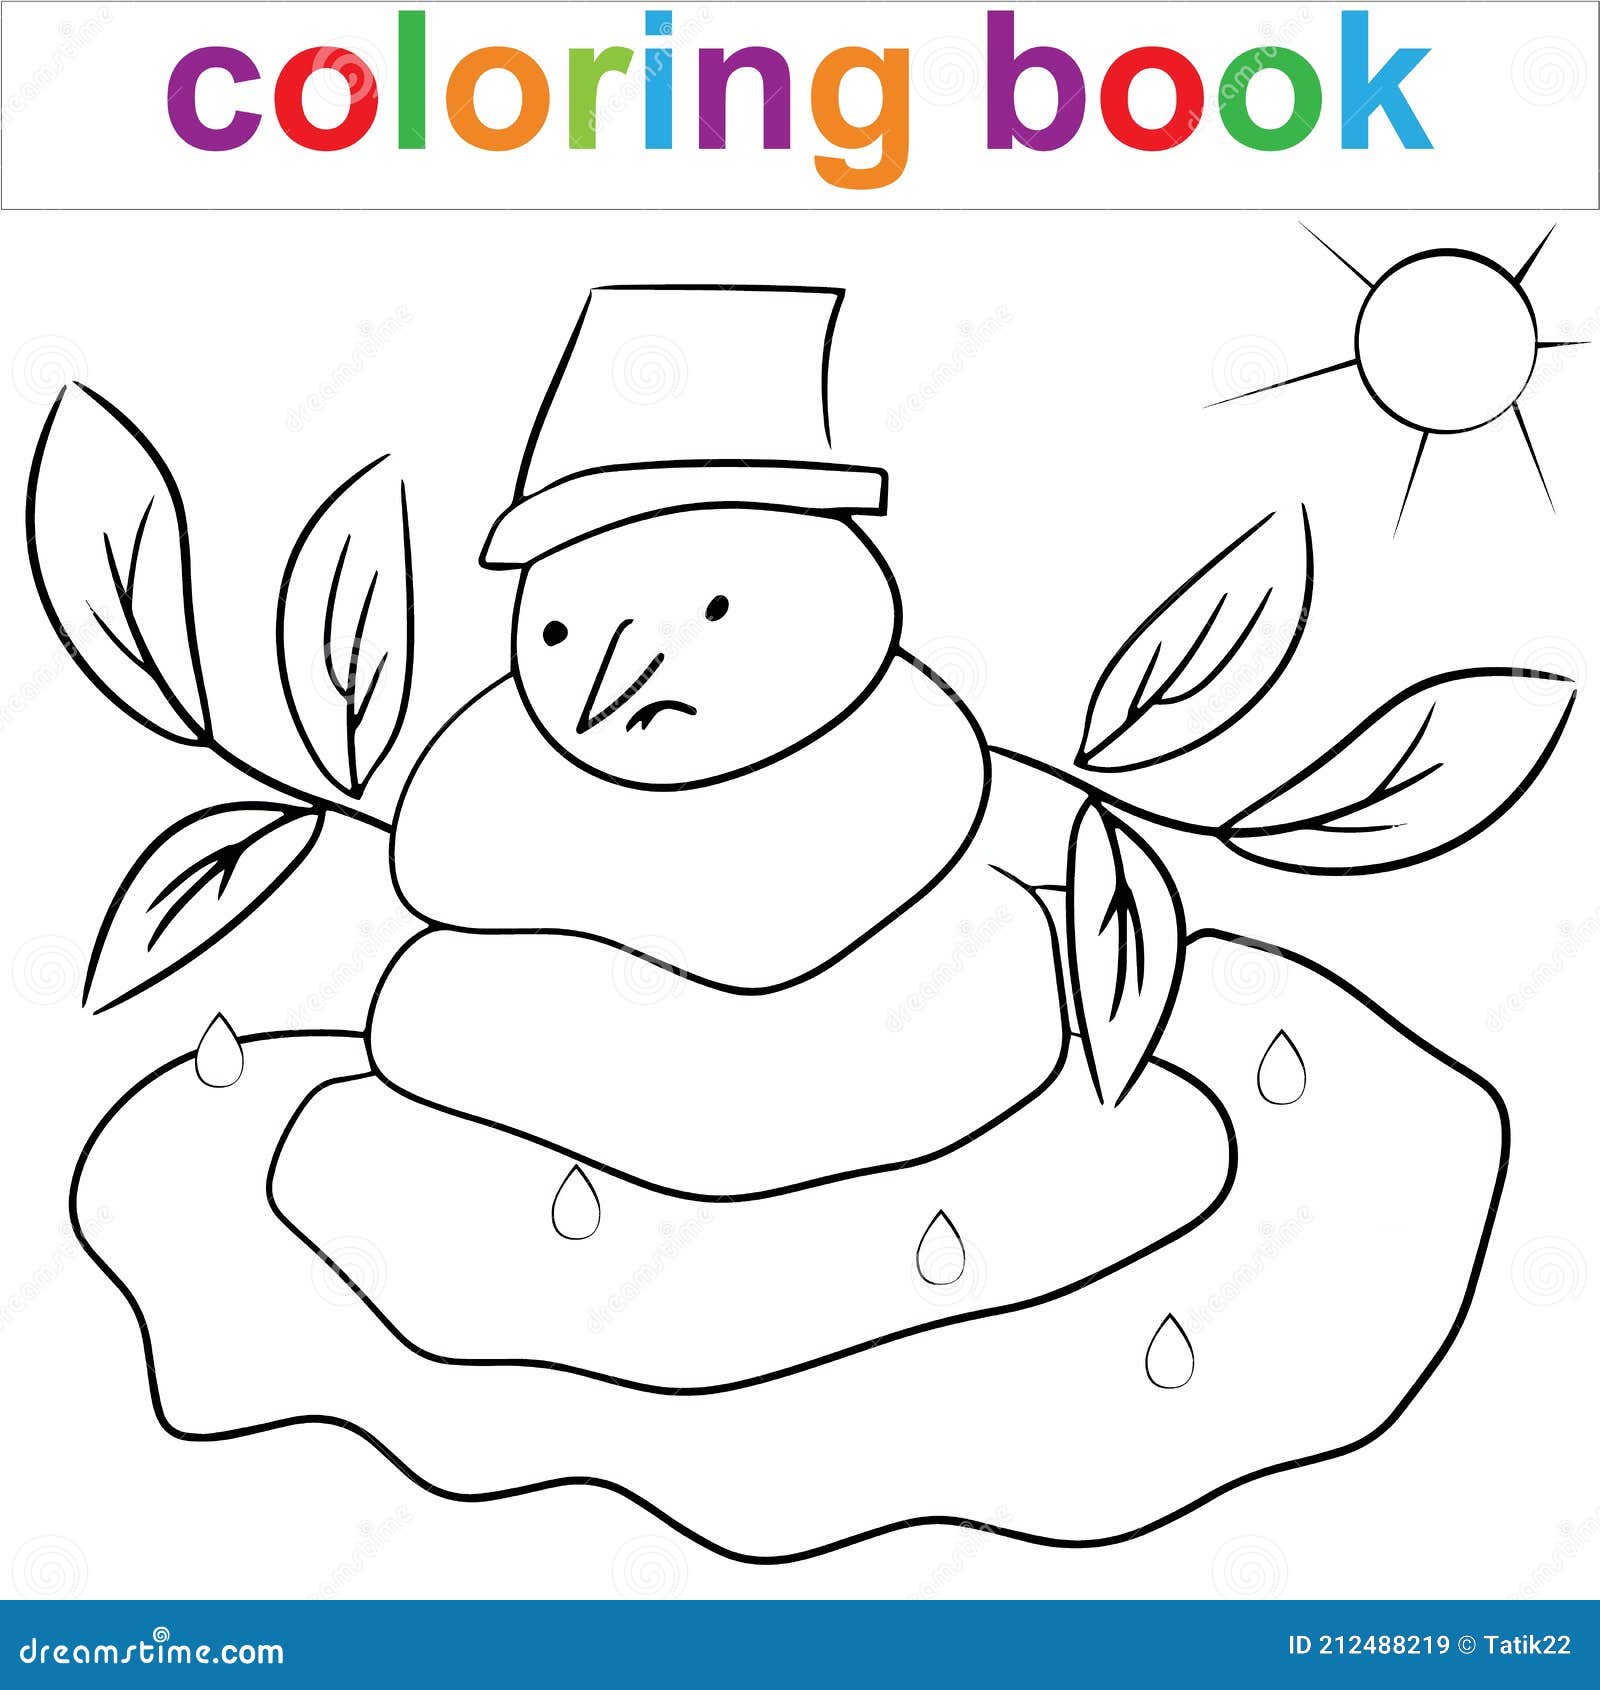 Melting Snowman Coloring Page